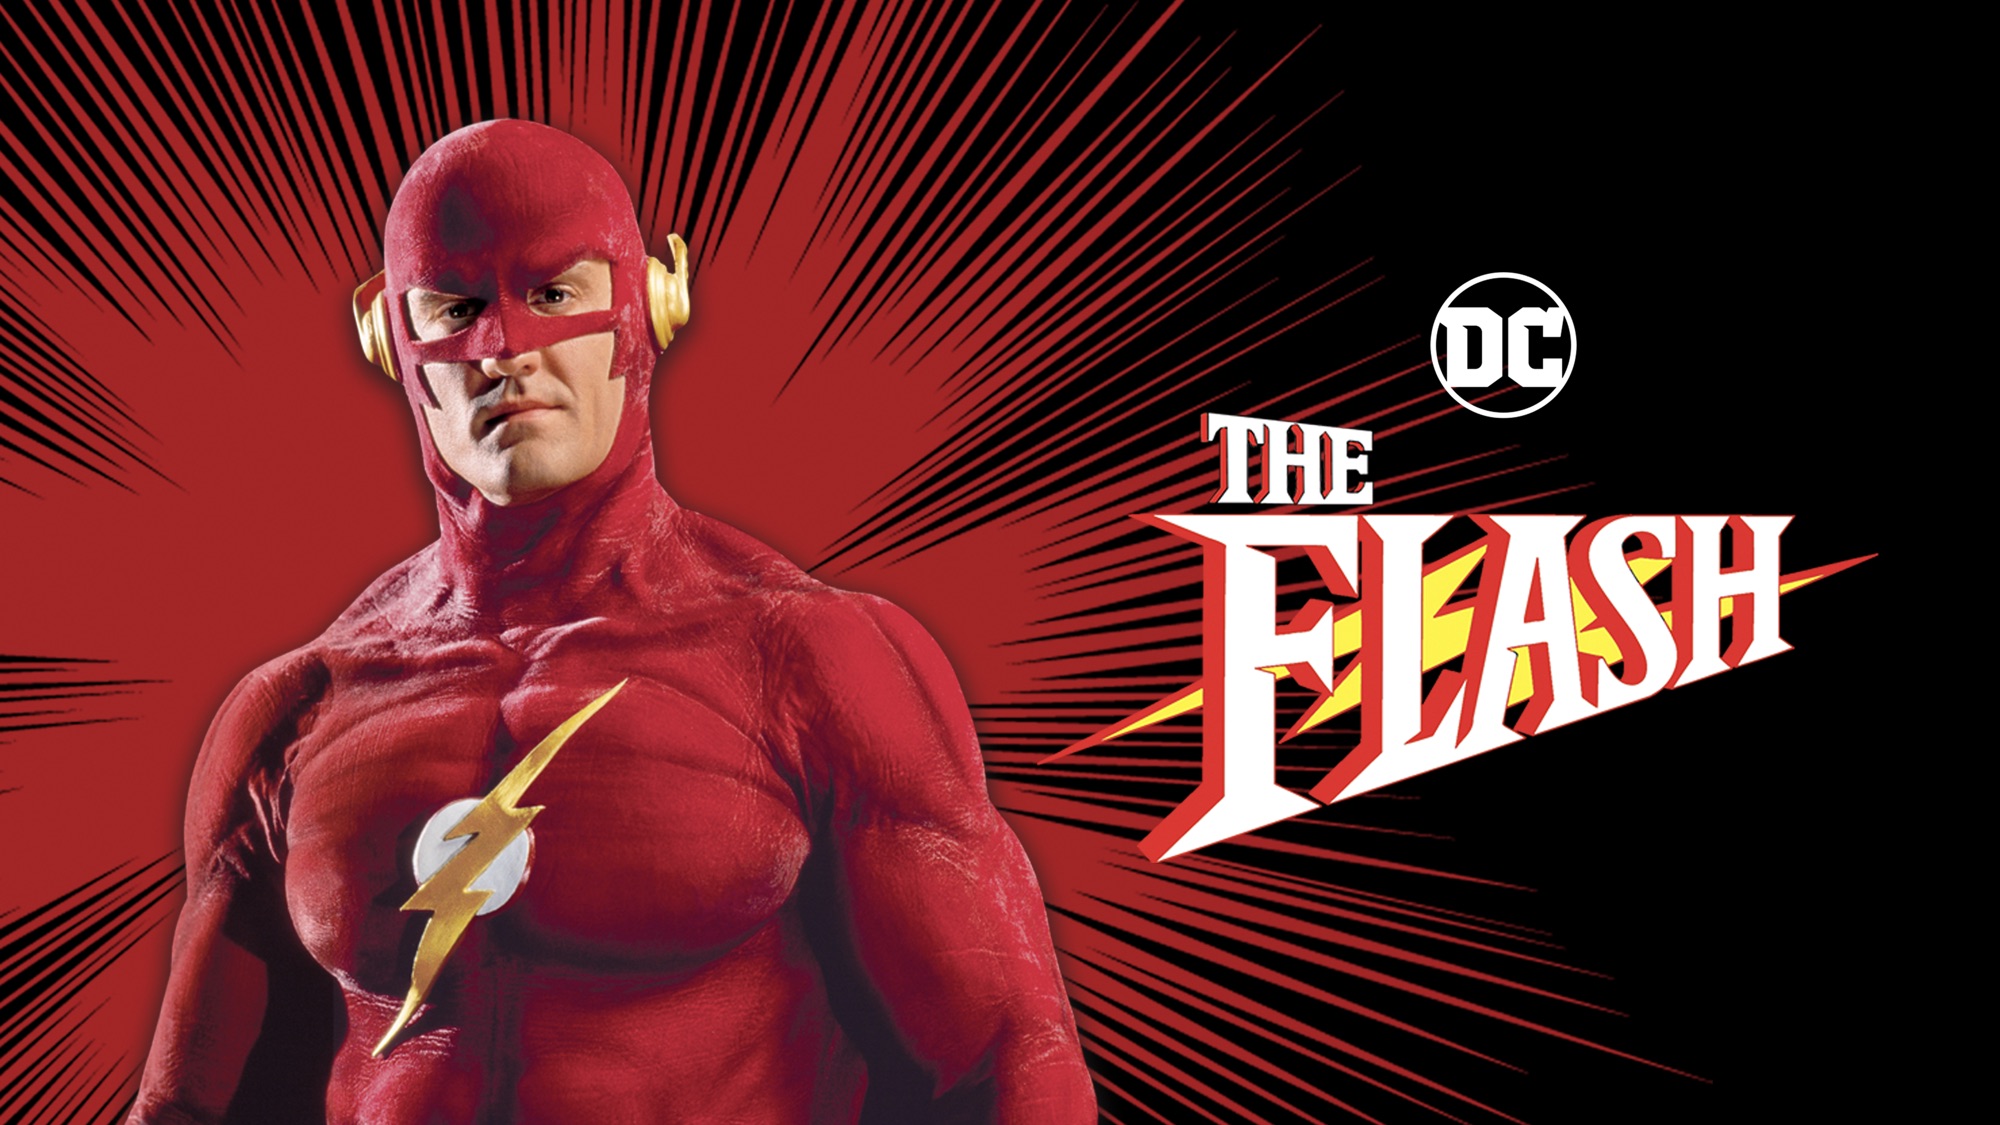 TV Show The Flash (1990) HD Wallpaper | Background Image